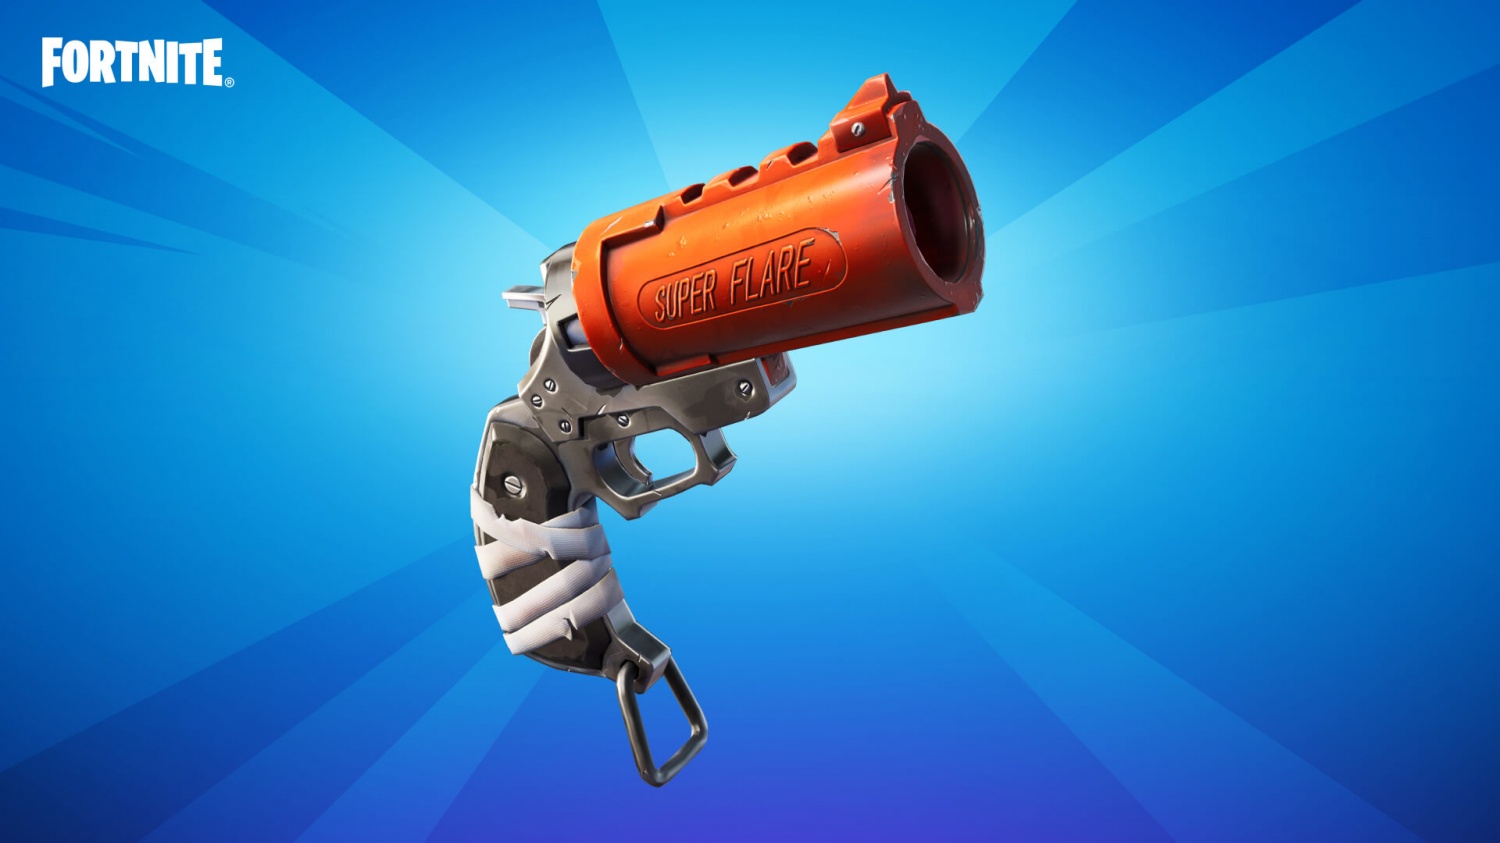 Fortnite What are Flare Guns and How Do You Find Them in the Battle Royale? Tech Times